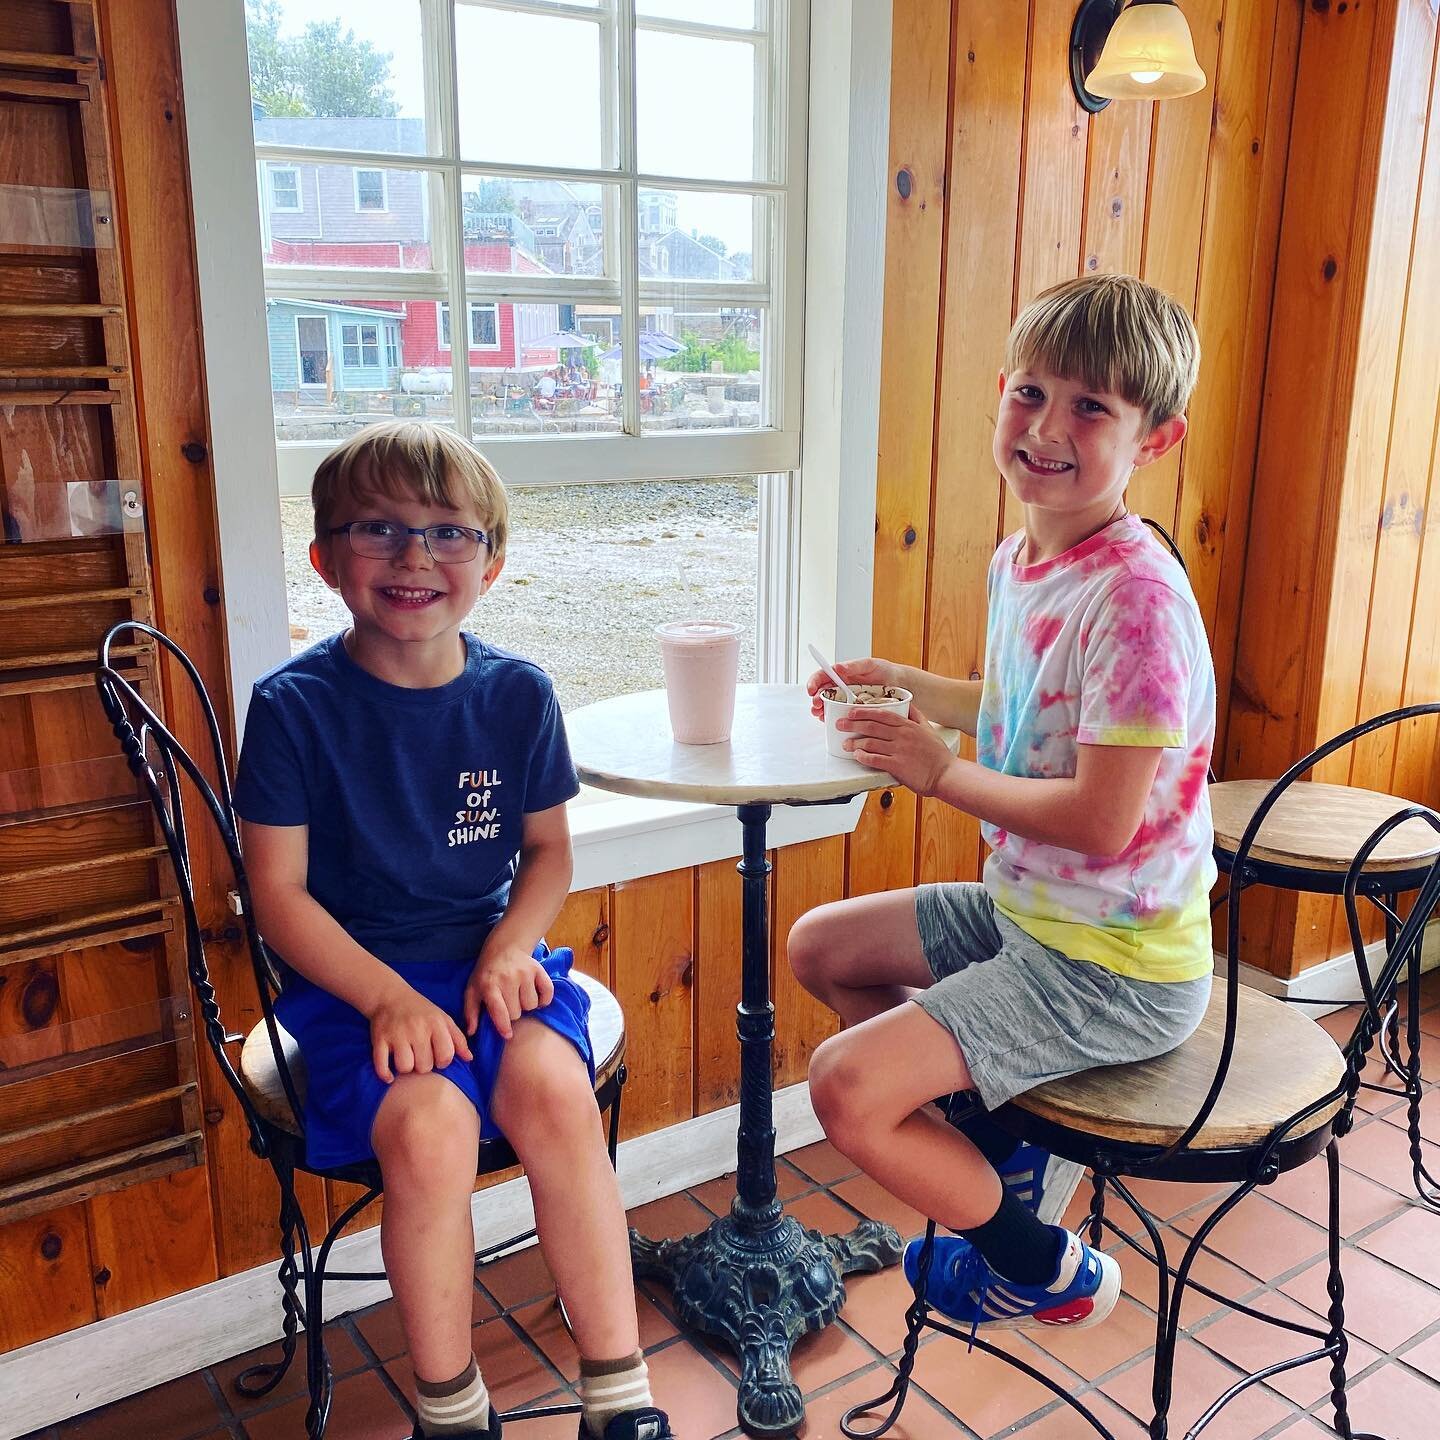 All smiles! 😁 Enjoying the day with a strawberry frappe and salty caramel truffle ice cream! #rockportma #icecream #bearskinneck #summer